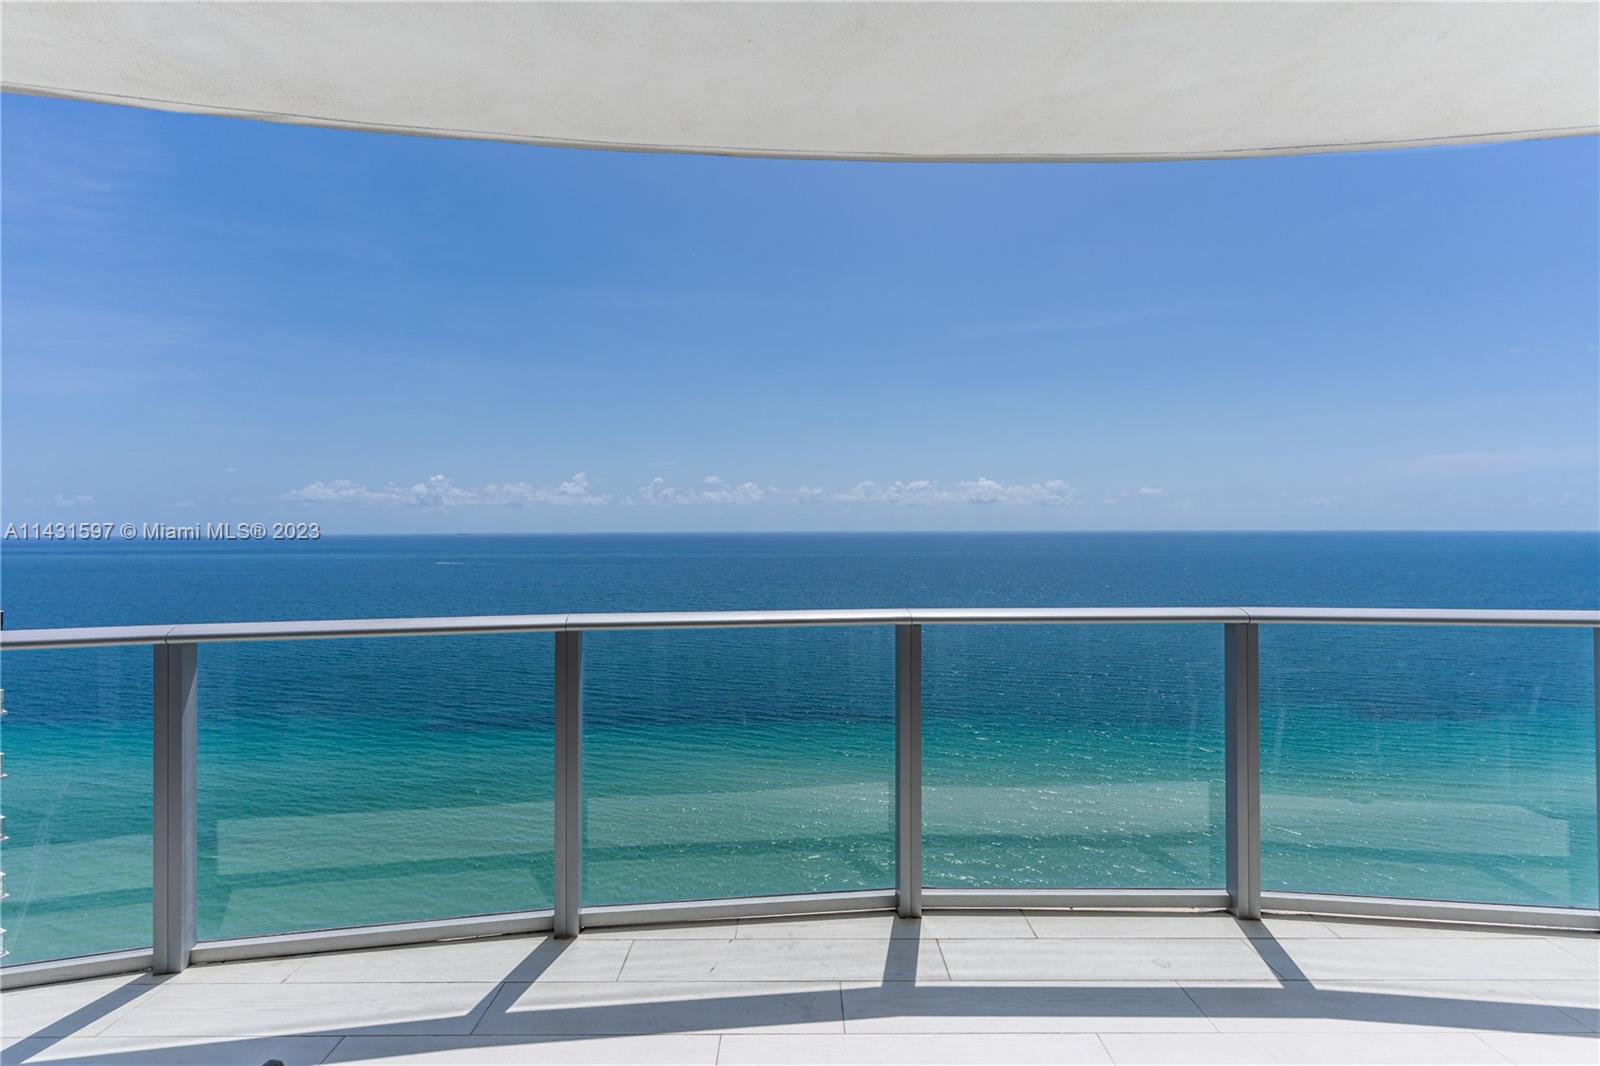 Introducing the Hyde Beach Hollywood, a premier oceanfront condominium offering a luxurious living e